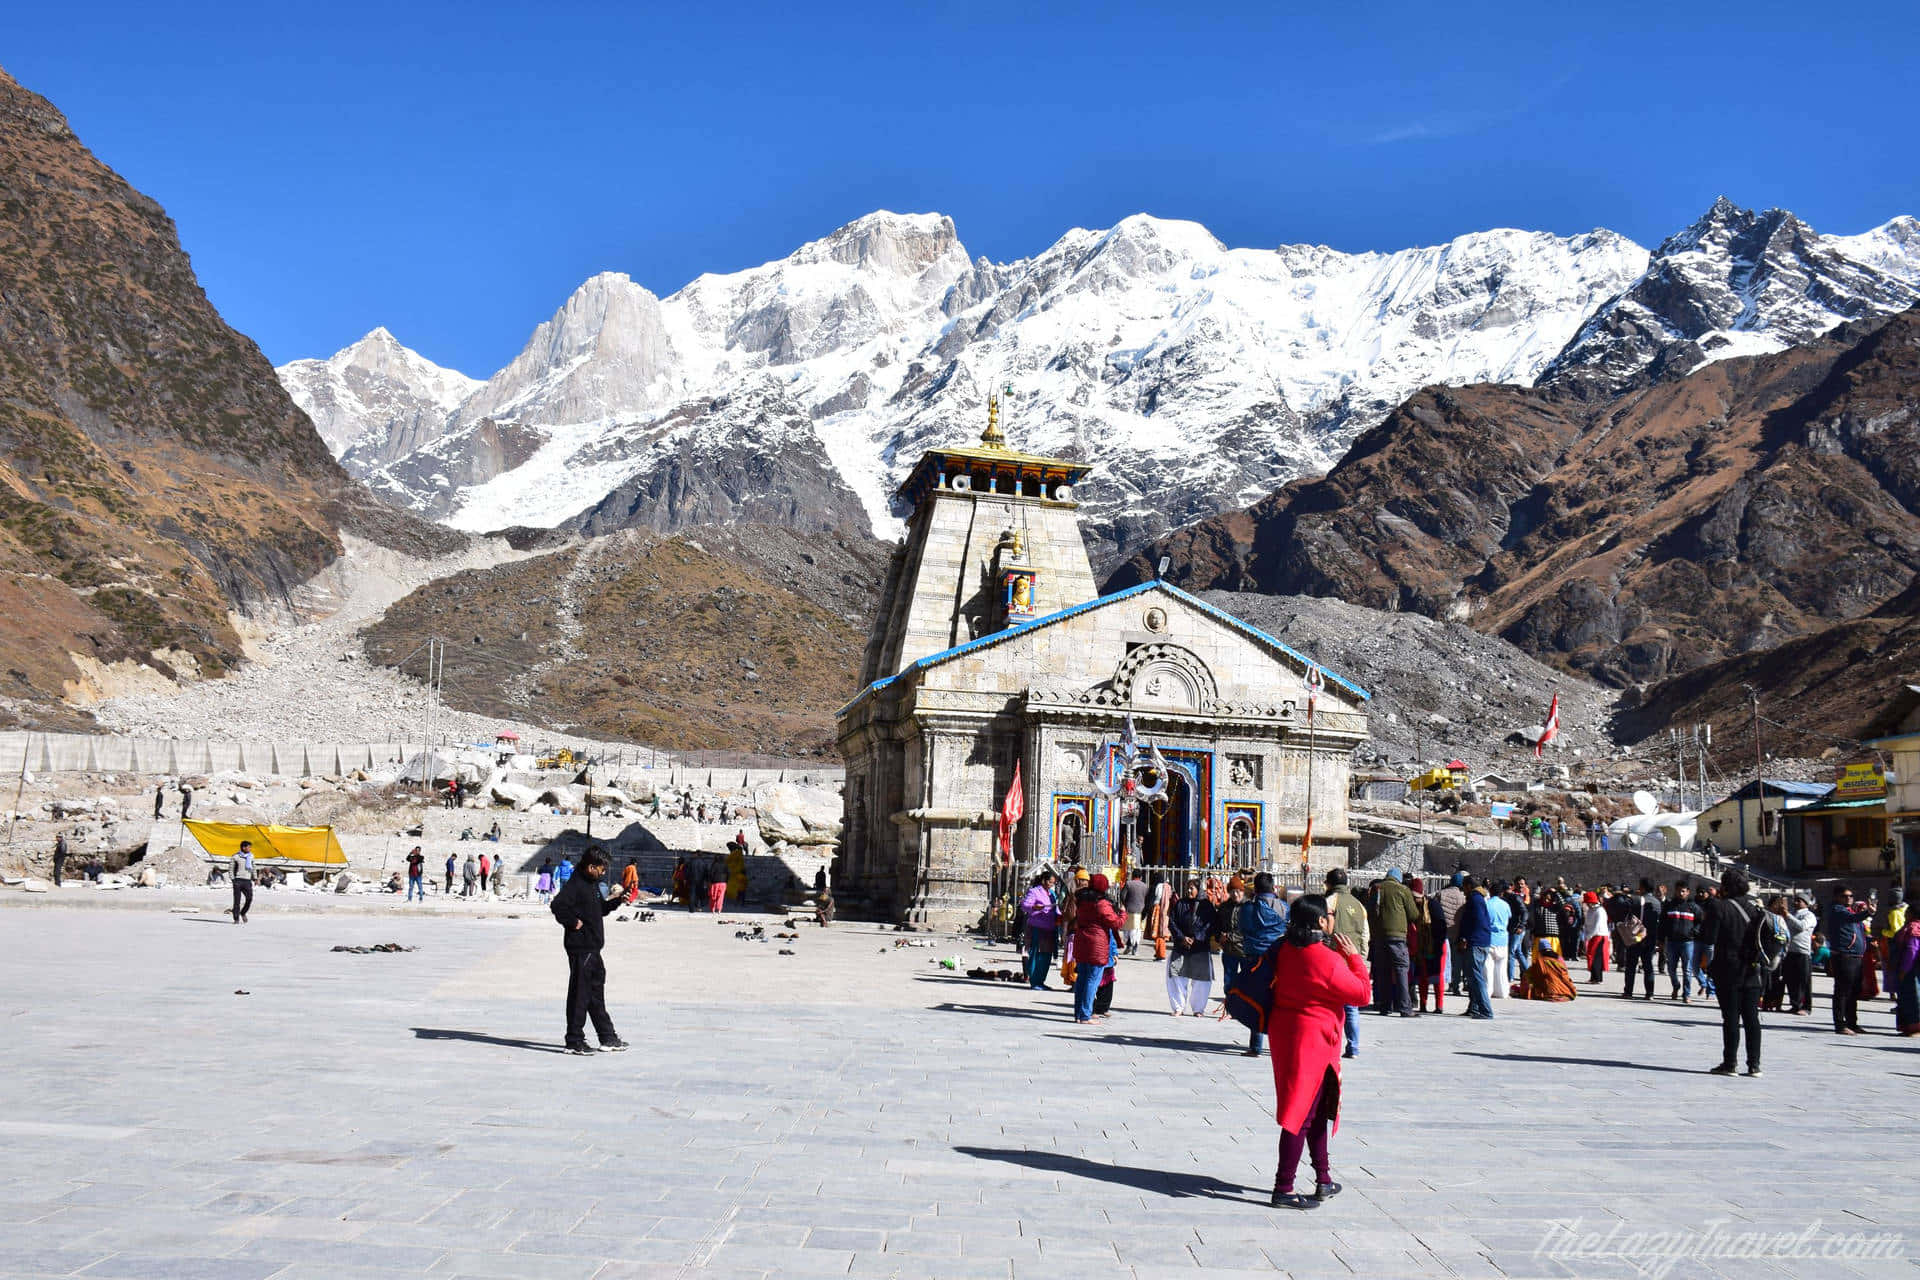 The majestic Kedarnath Temple in the backdrop of snow-capped peaks